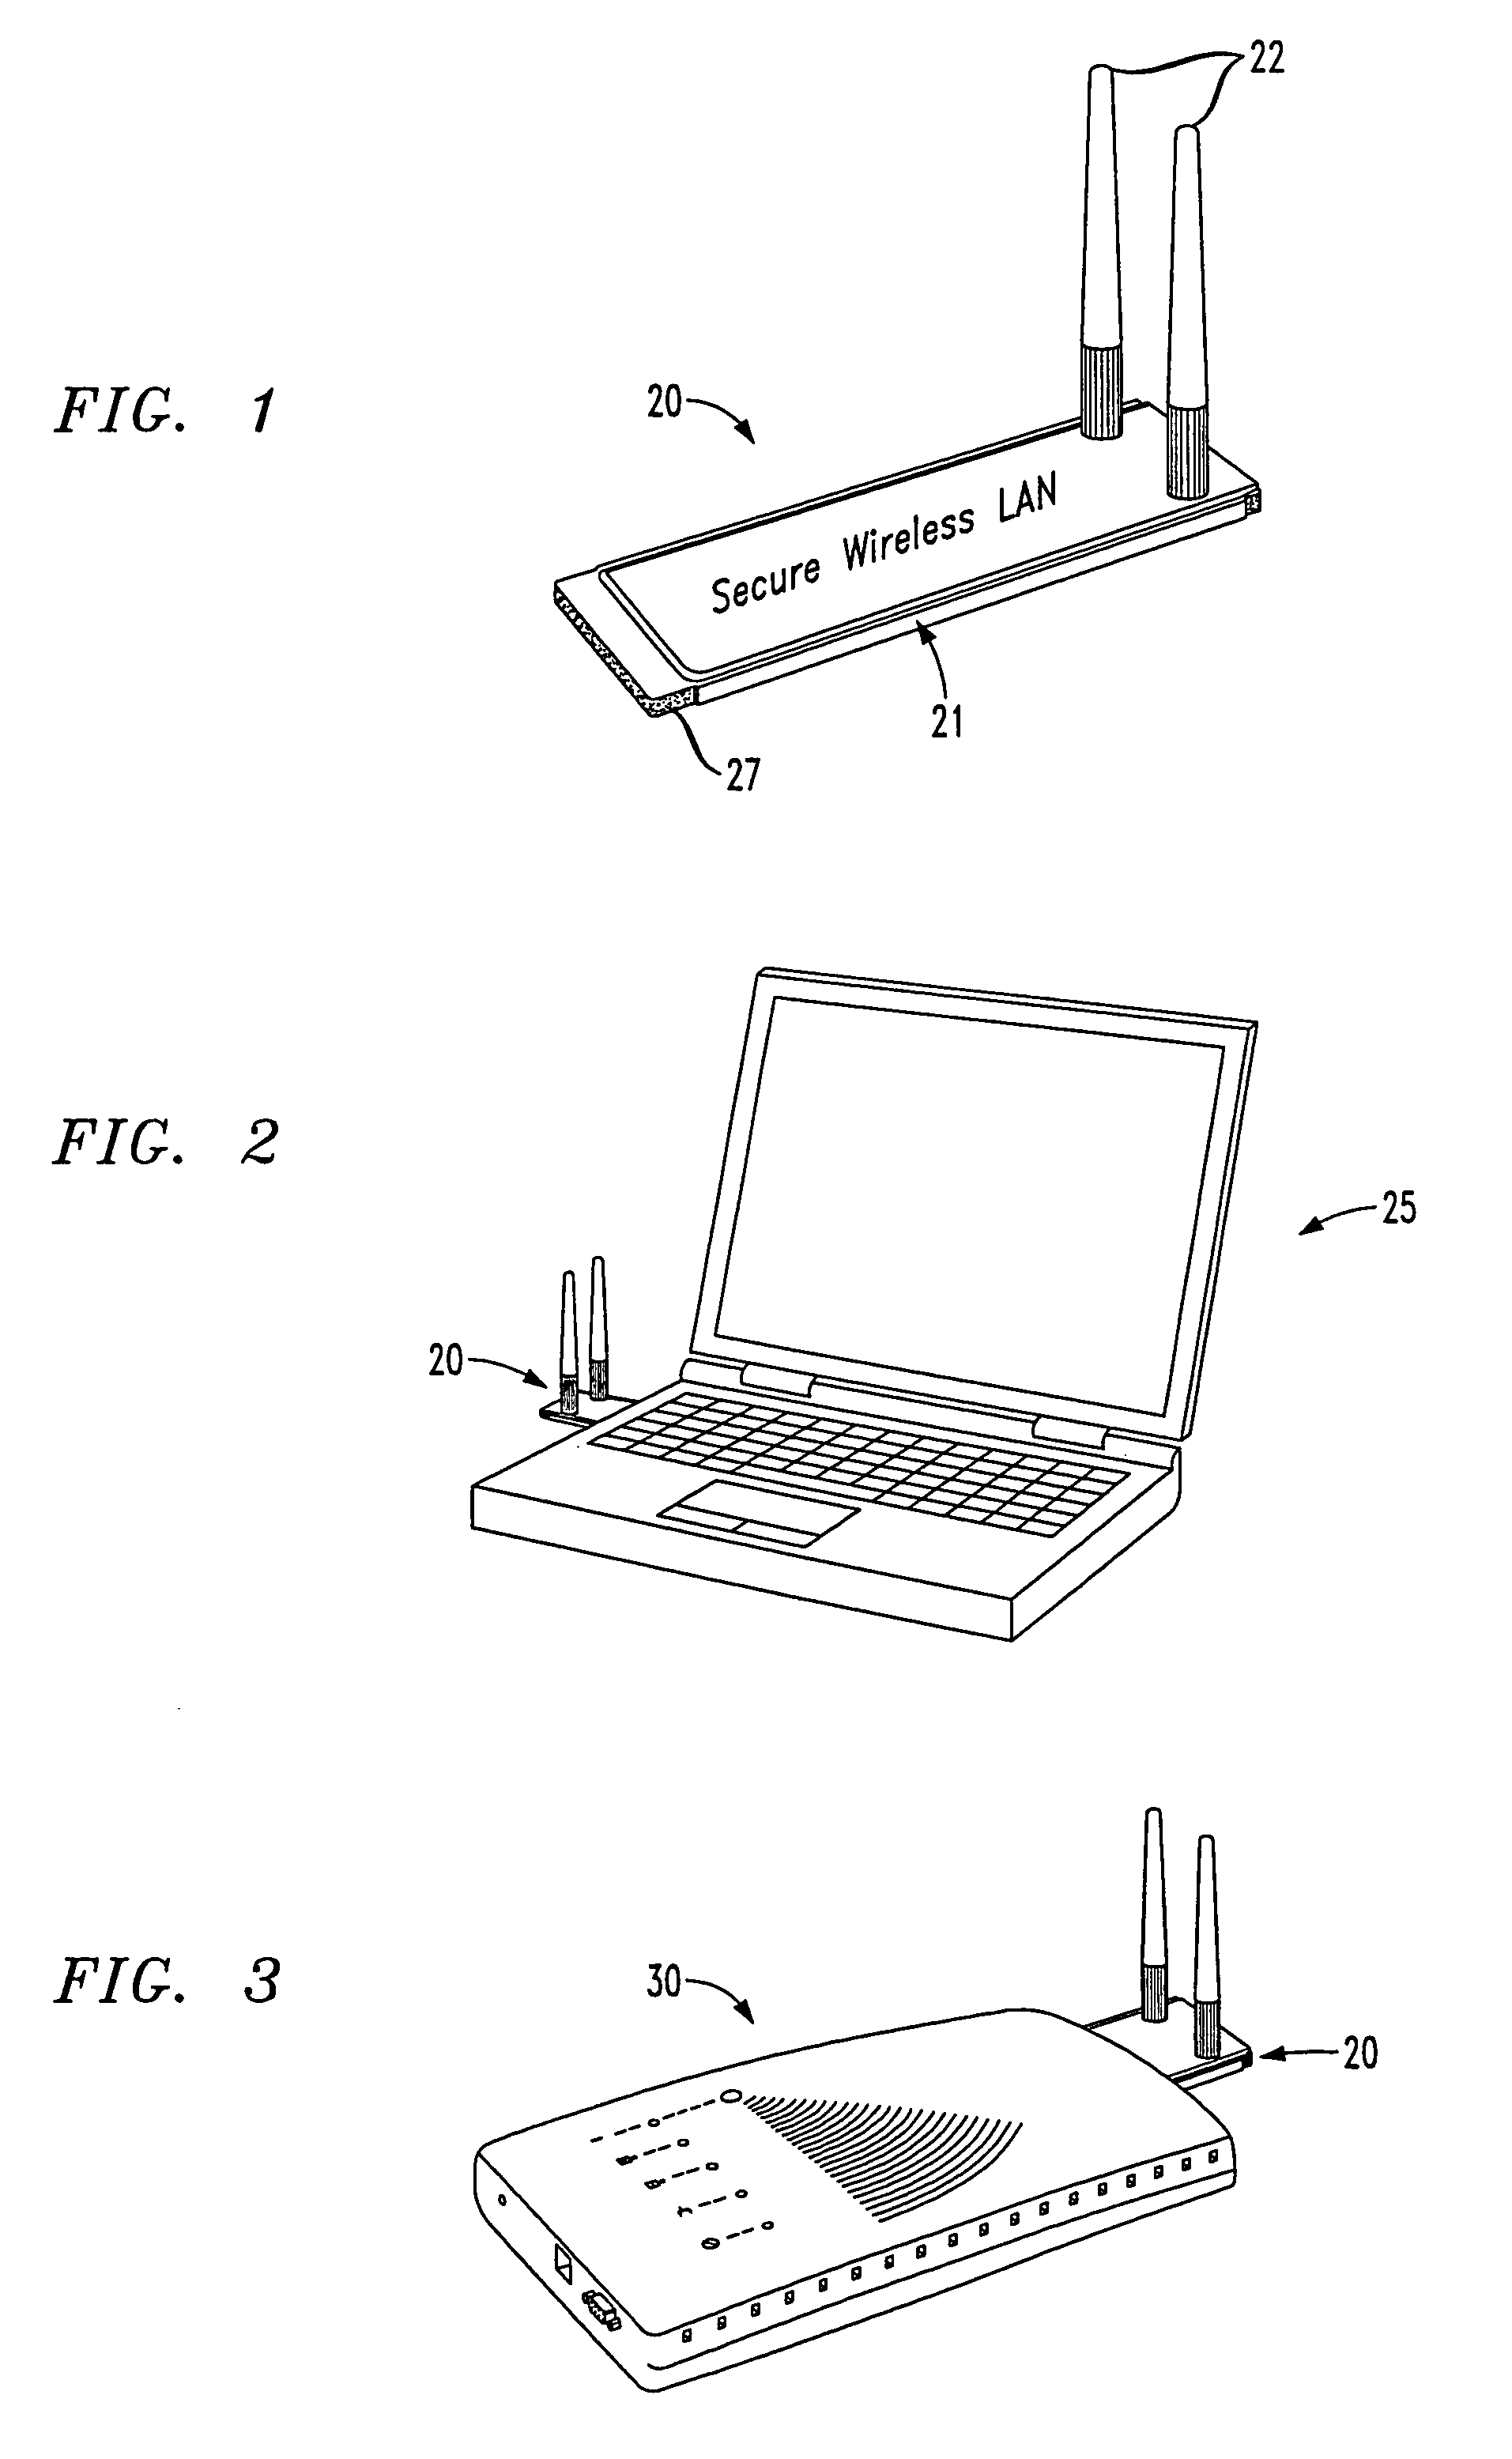 Secure wireless LAN device and associated methods